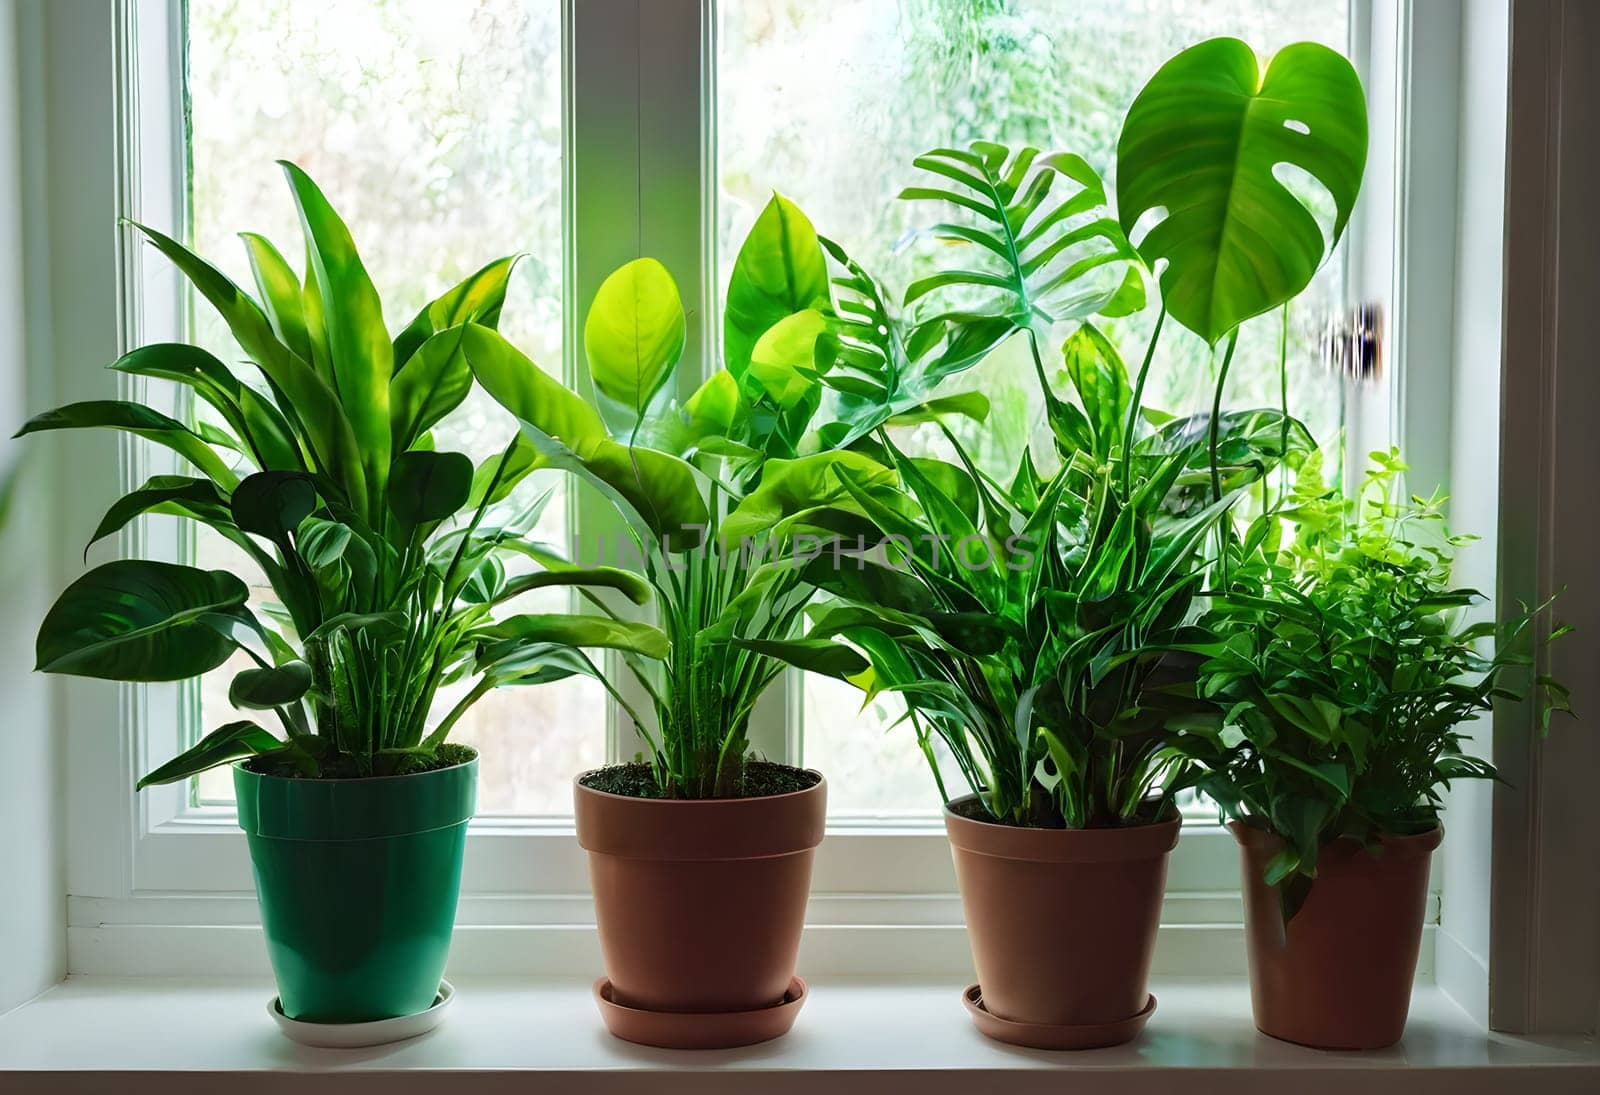 Nature's Charm: Indoor Gardening with Potted Plants